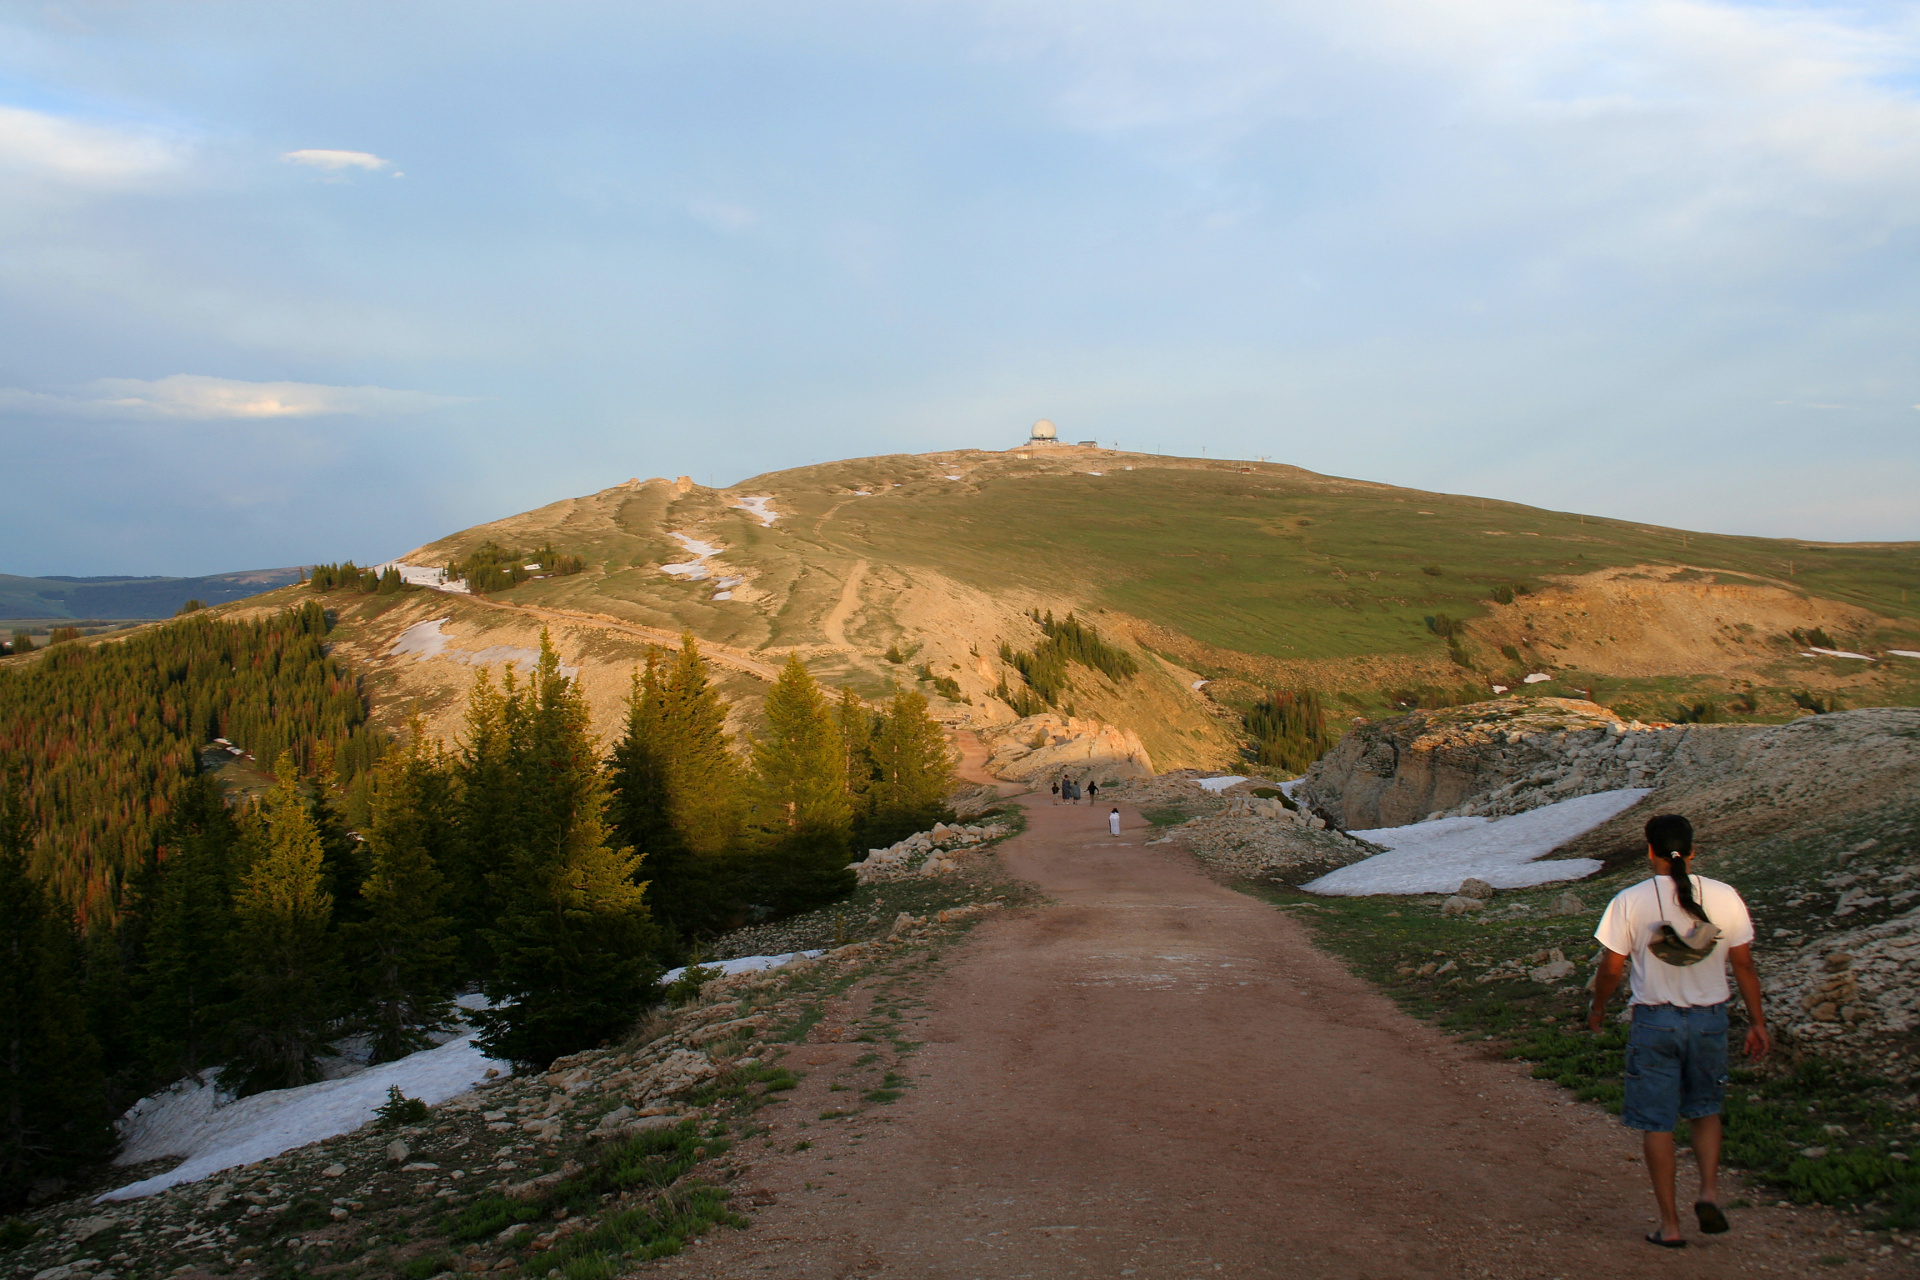 Medicine Mountain (Travels » US Trip 2: Cheyenne Epic » The Country » Bighorn Mountains)